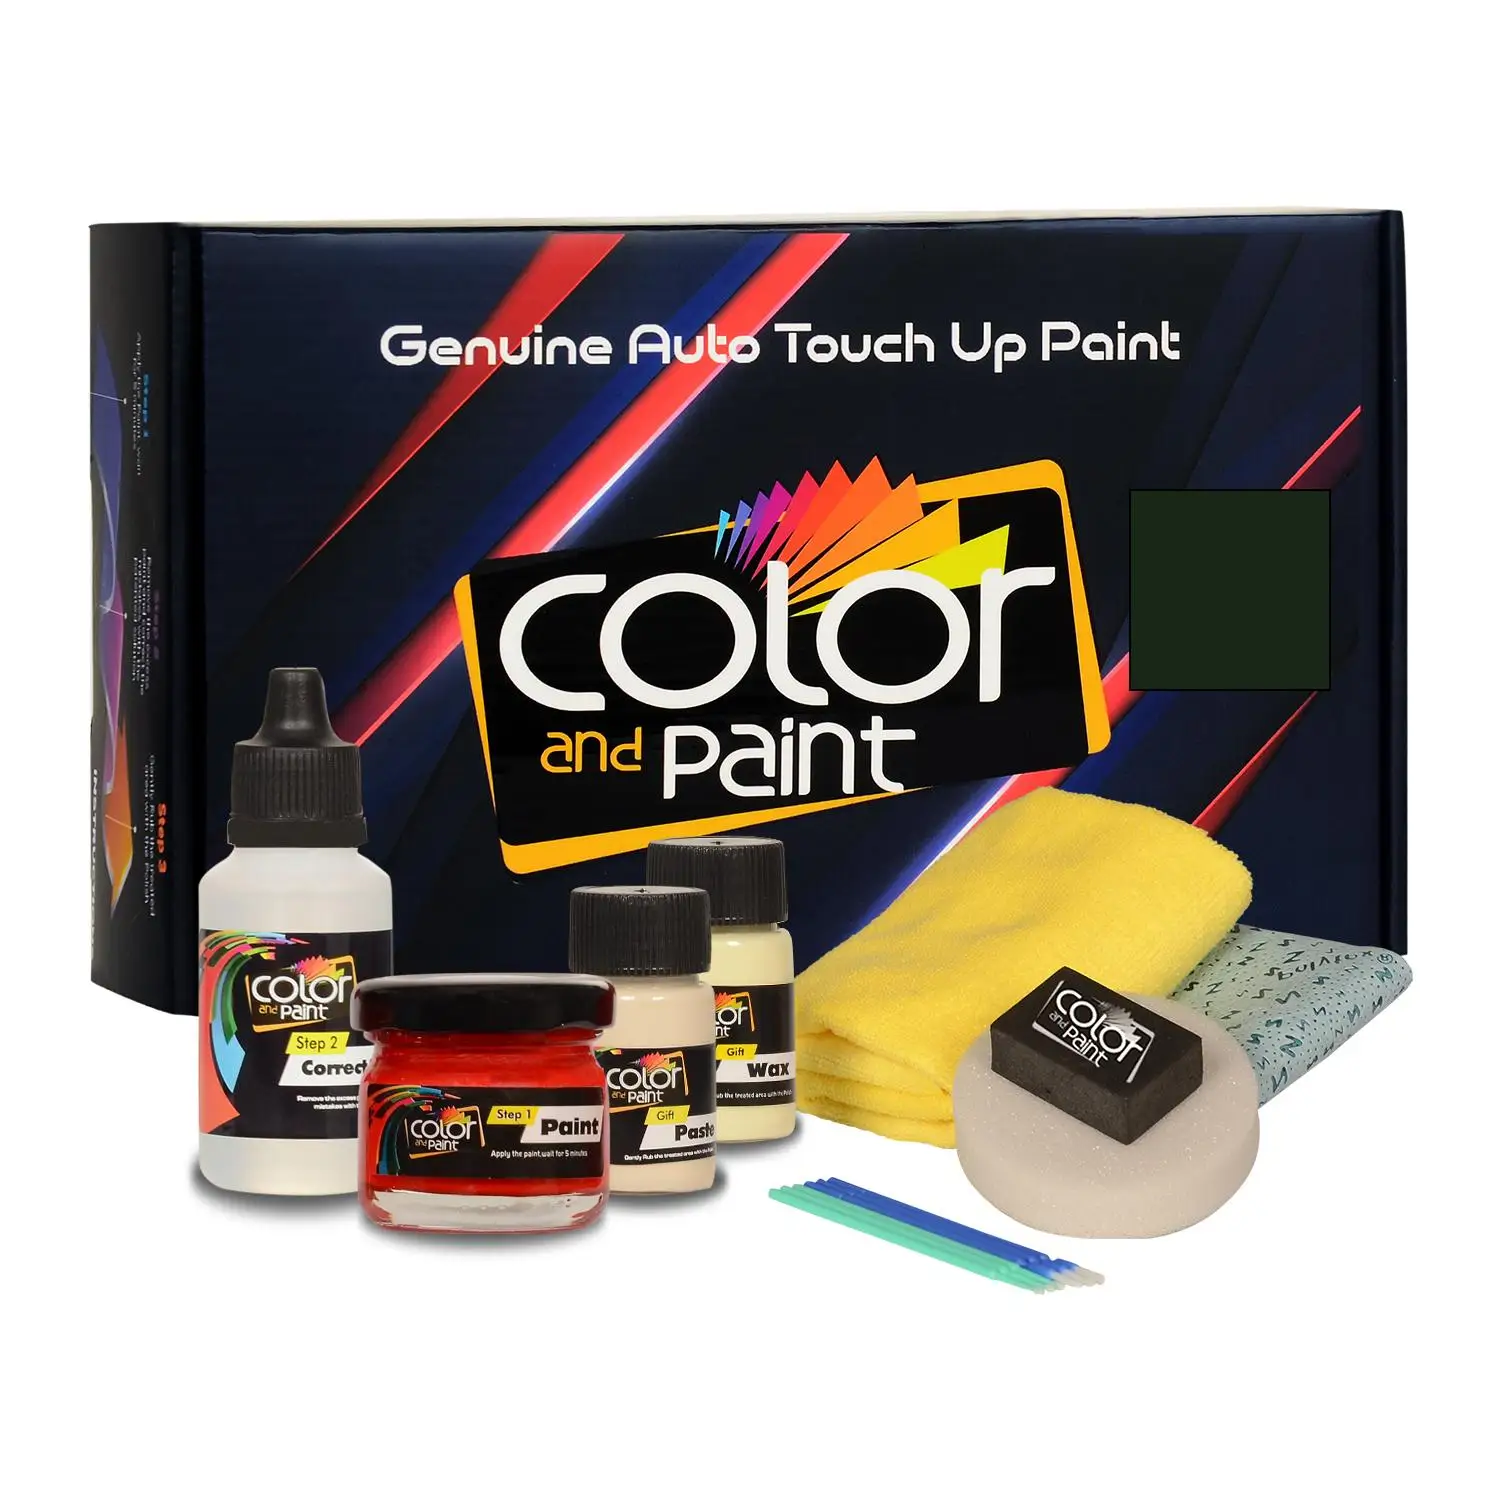 

Color and Paint compatible with Renault Automotive Touch Up Paint - VERT OURAL MET - DPY - Basic Care